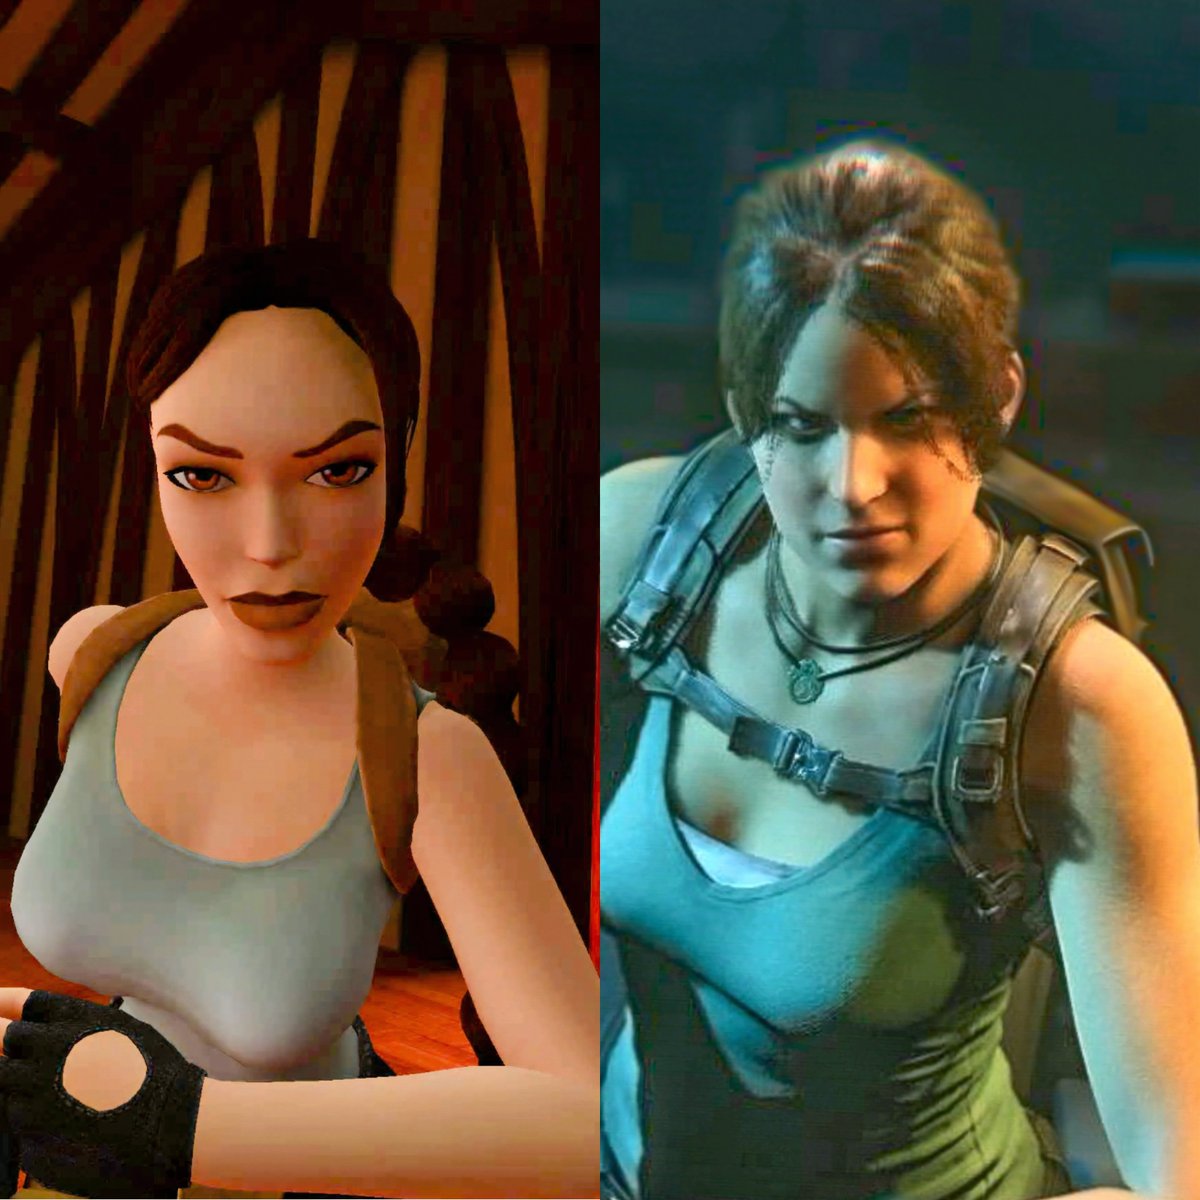 western devs perpetuate the idea: femininity in women must be erased, like how Crystal Dynamics (yes the ones who bombed with Marvel Avengers) updated Lara Croft & yes leaks show they are making Lara lesbian in the next game. Another Sweet Baby Inc consultancy detection for sure.